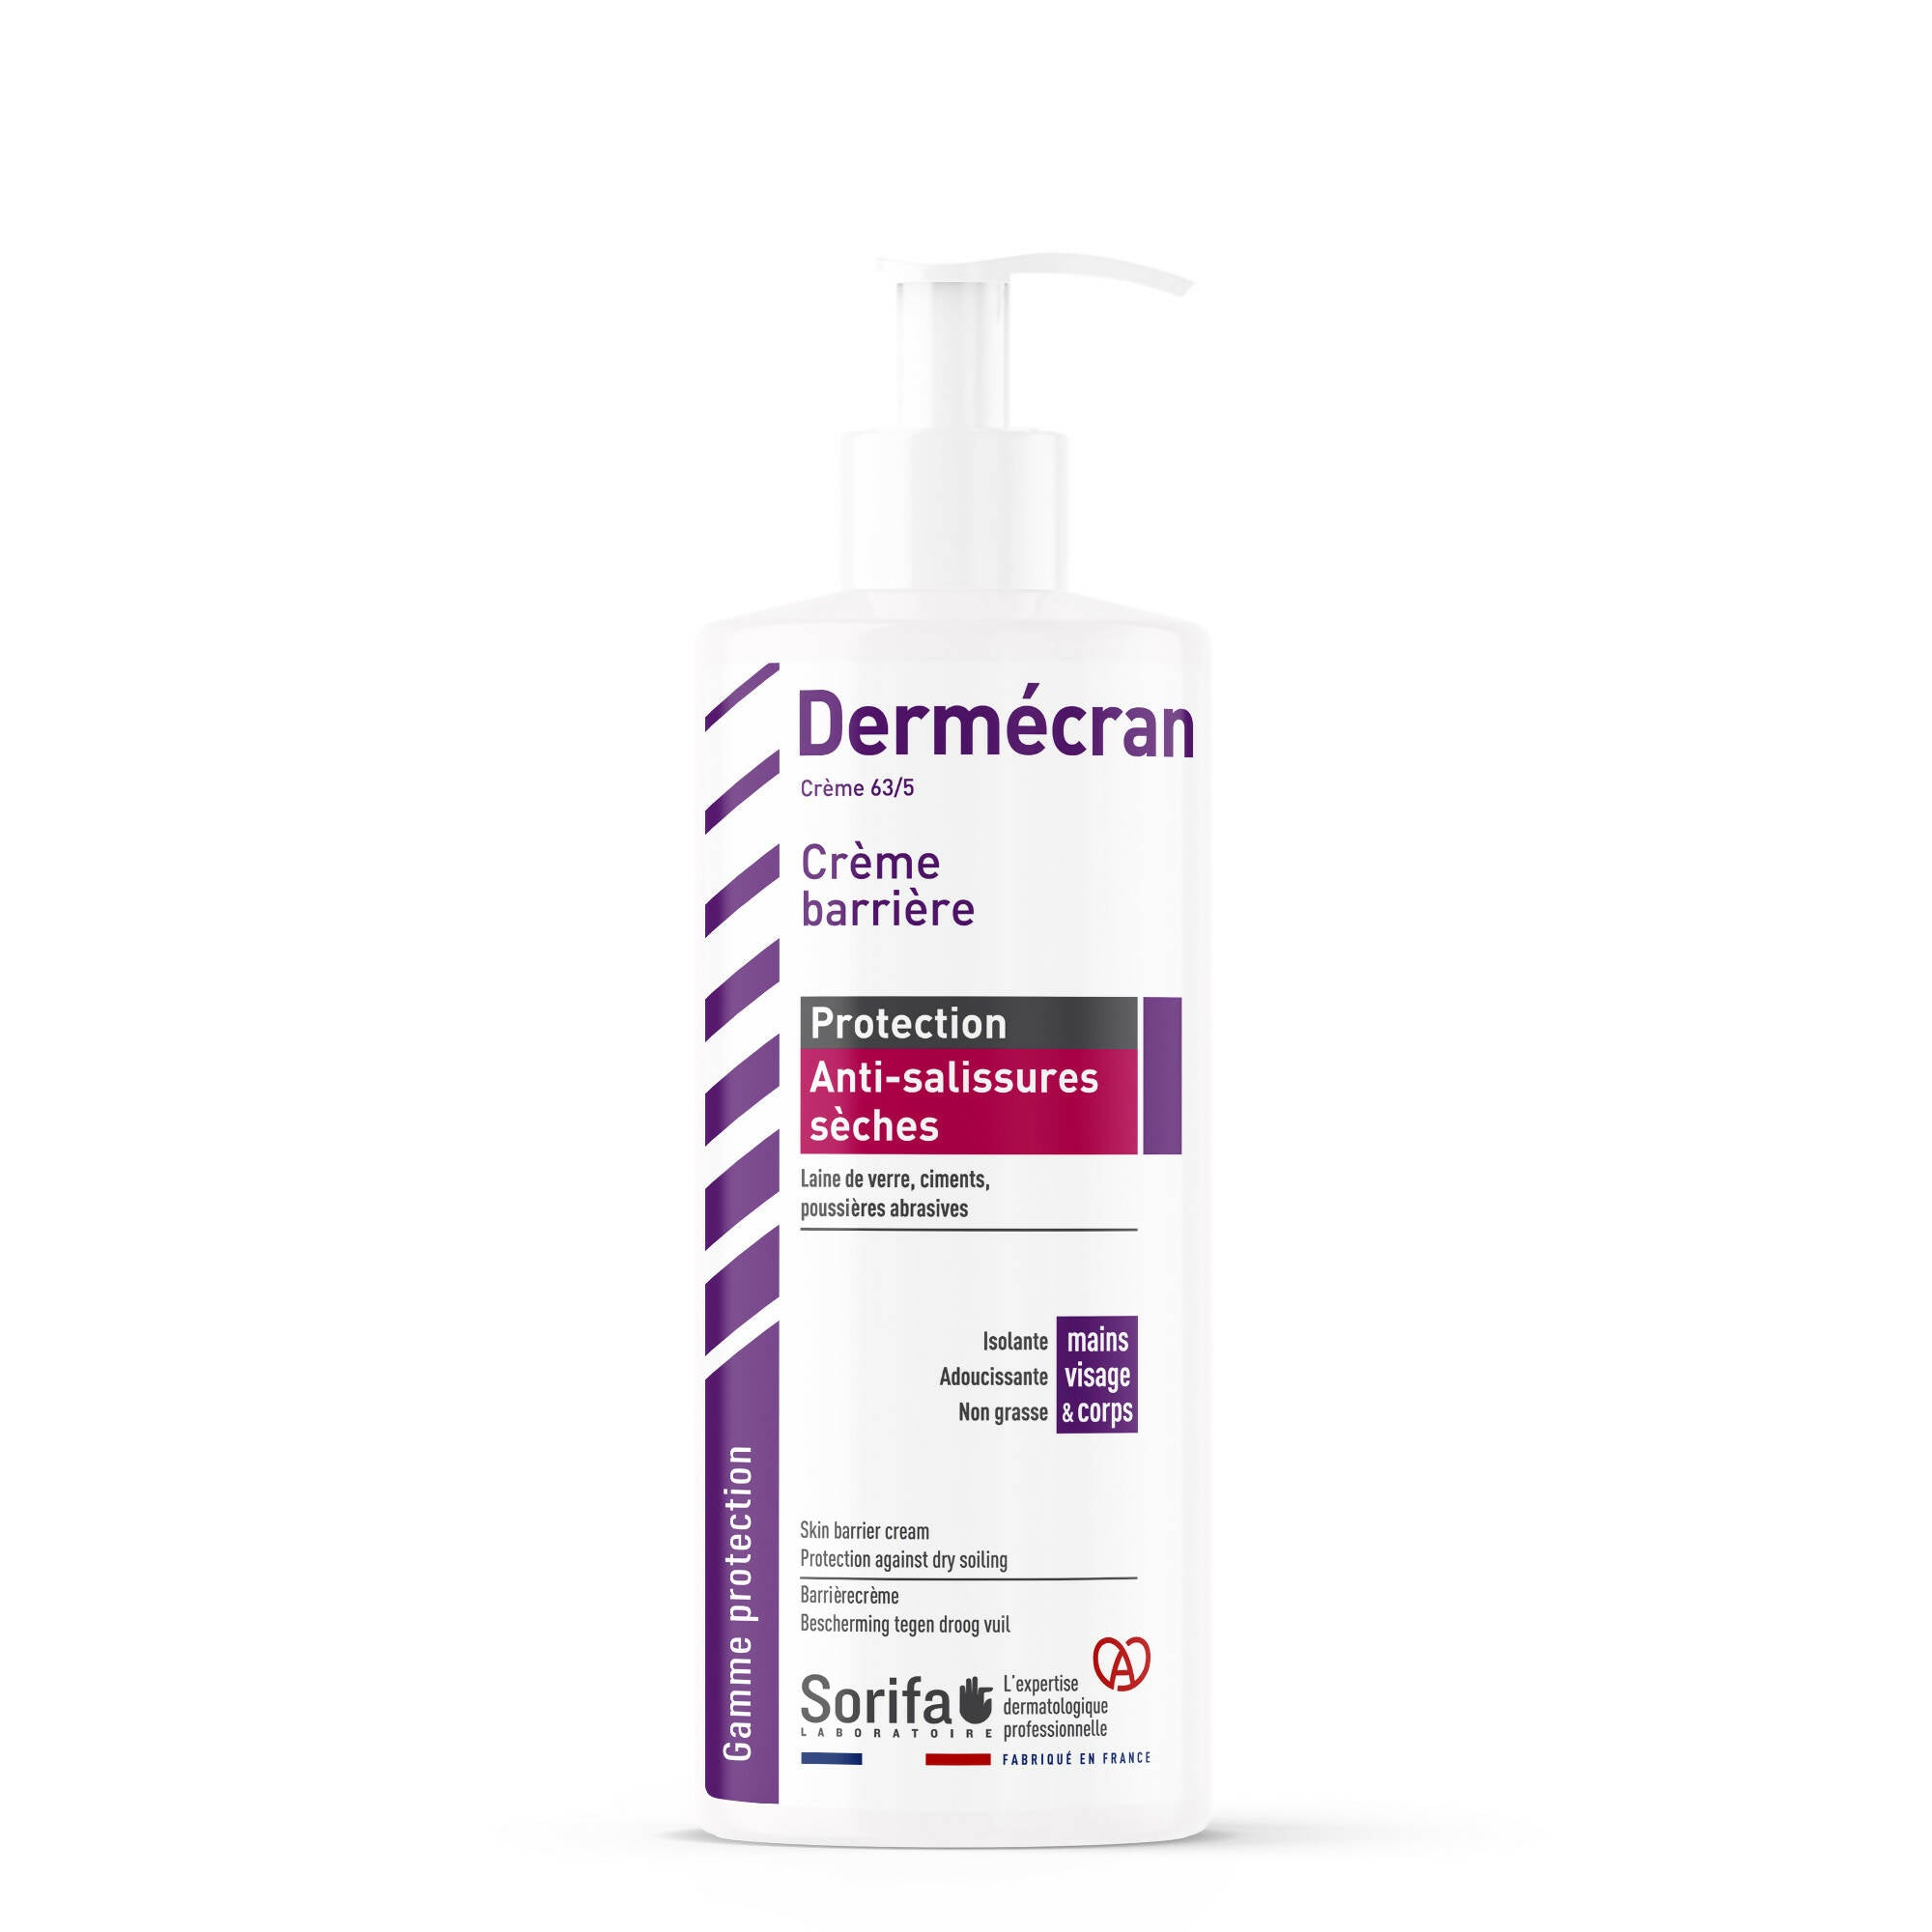 SORIFA - Set of 3 - Dermscreen - Barrier cream - ANTI-DRY DIRT protection - Glass wool - cement - dust - Hands, face and body - High tolerance - 500 ml pump bottle. - 0